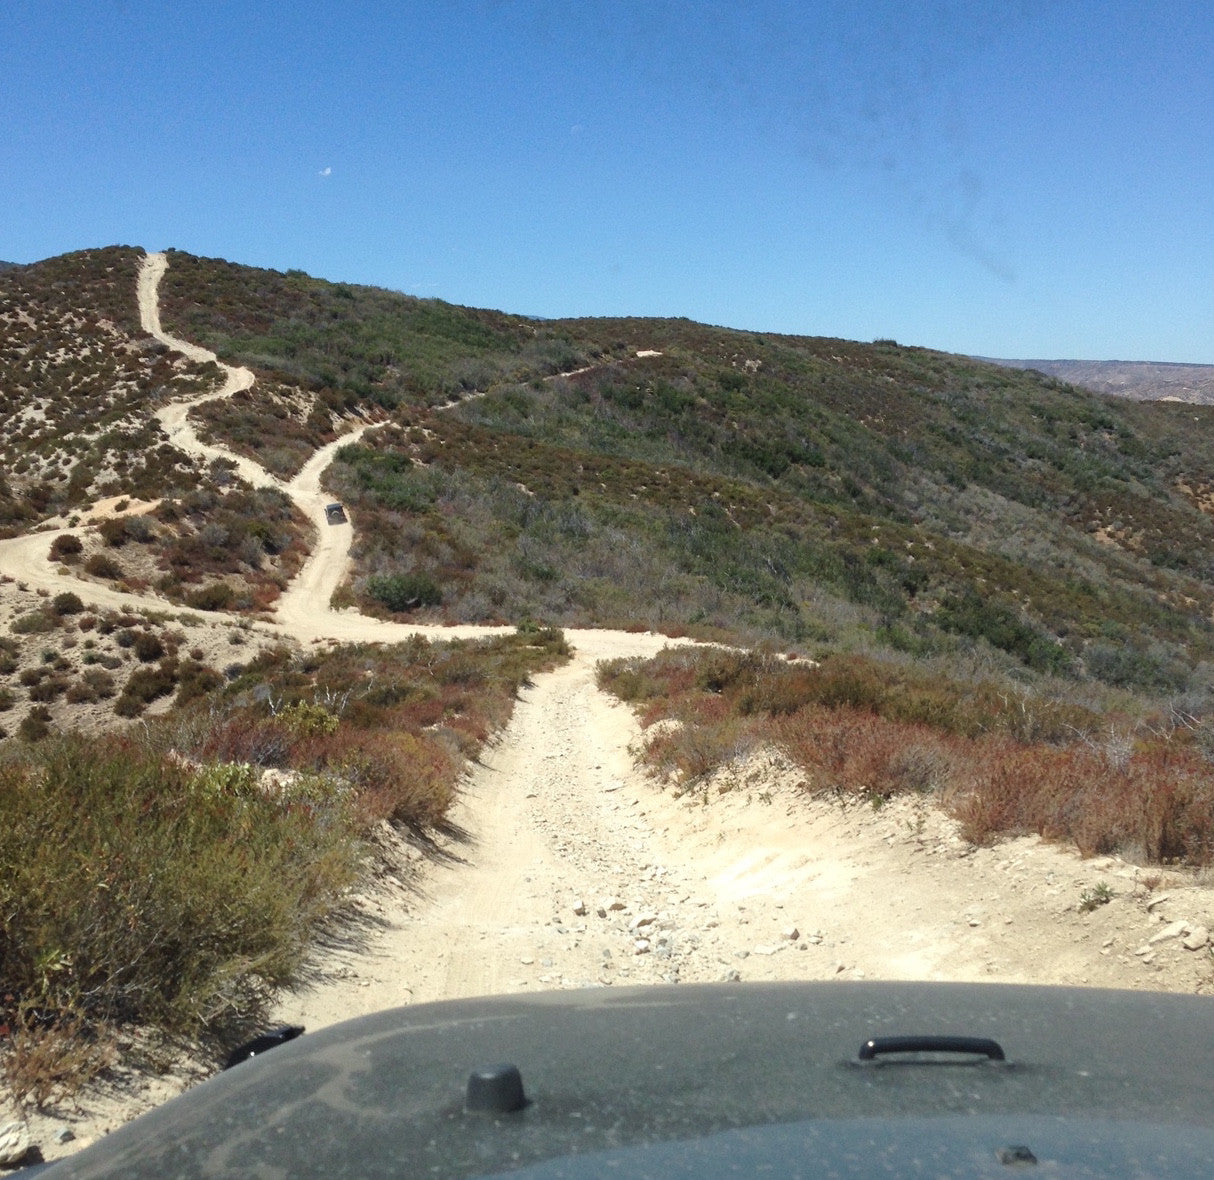 The general do’s and don’t for your first offroading trip